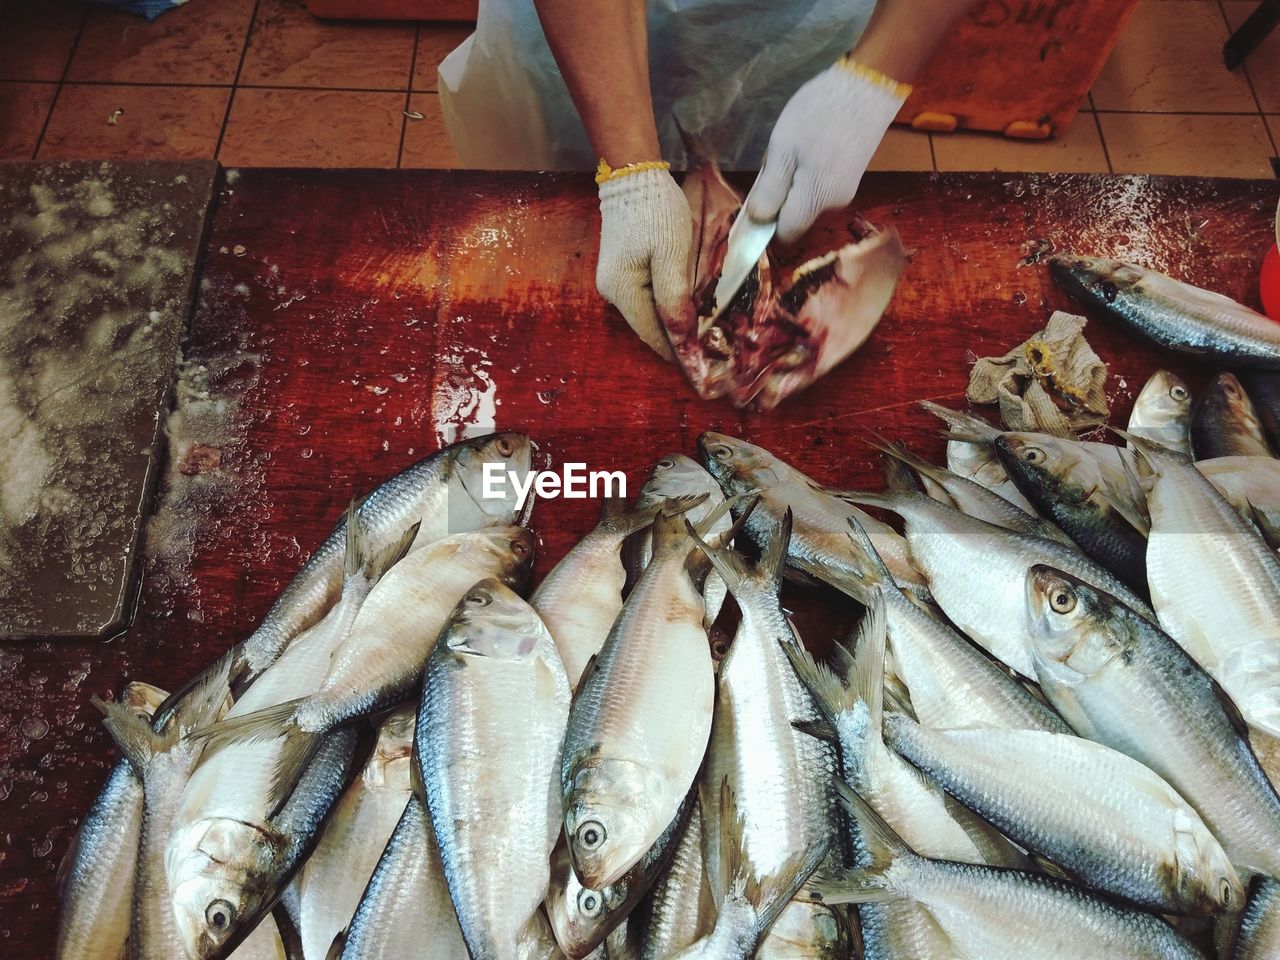 Worker removing the guts of a fish, ikan terubuk also known as toli shad at fish market.